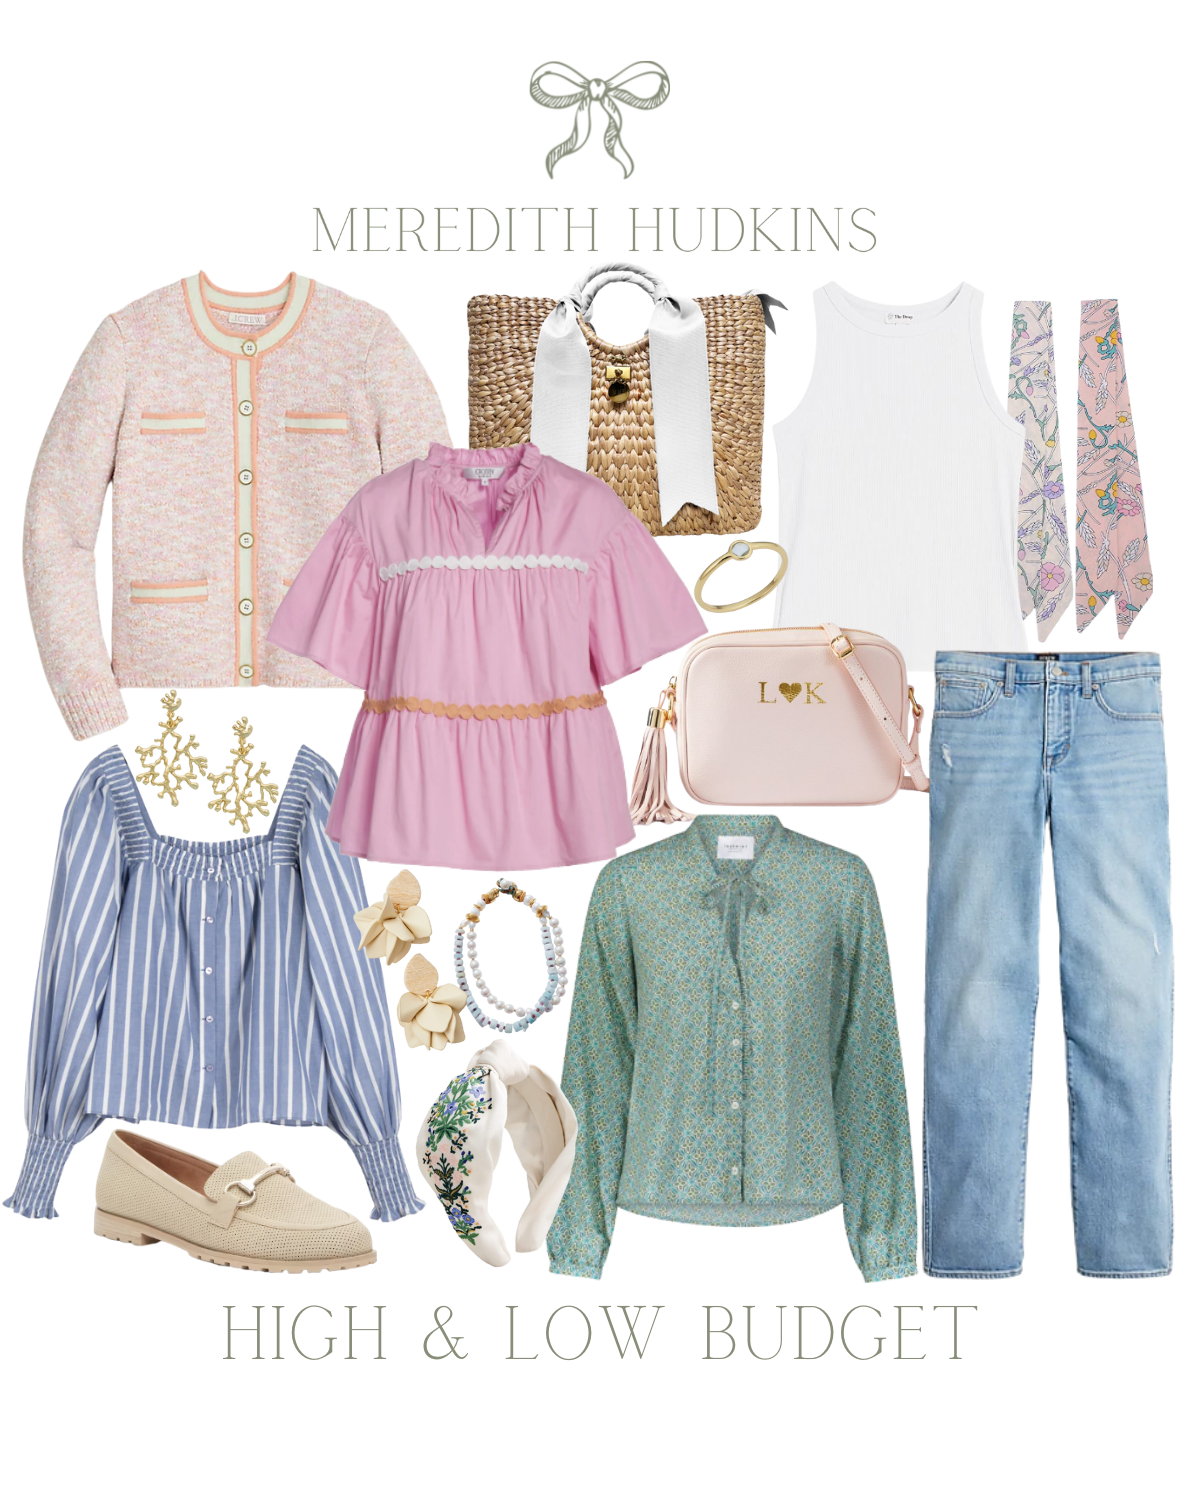 high and low budget fashion finds9.png